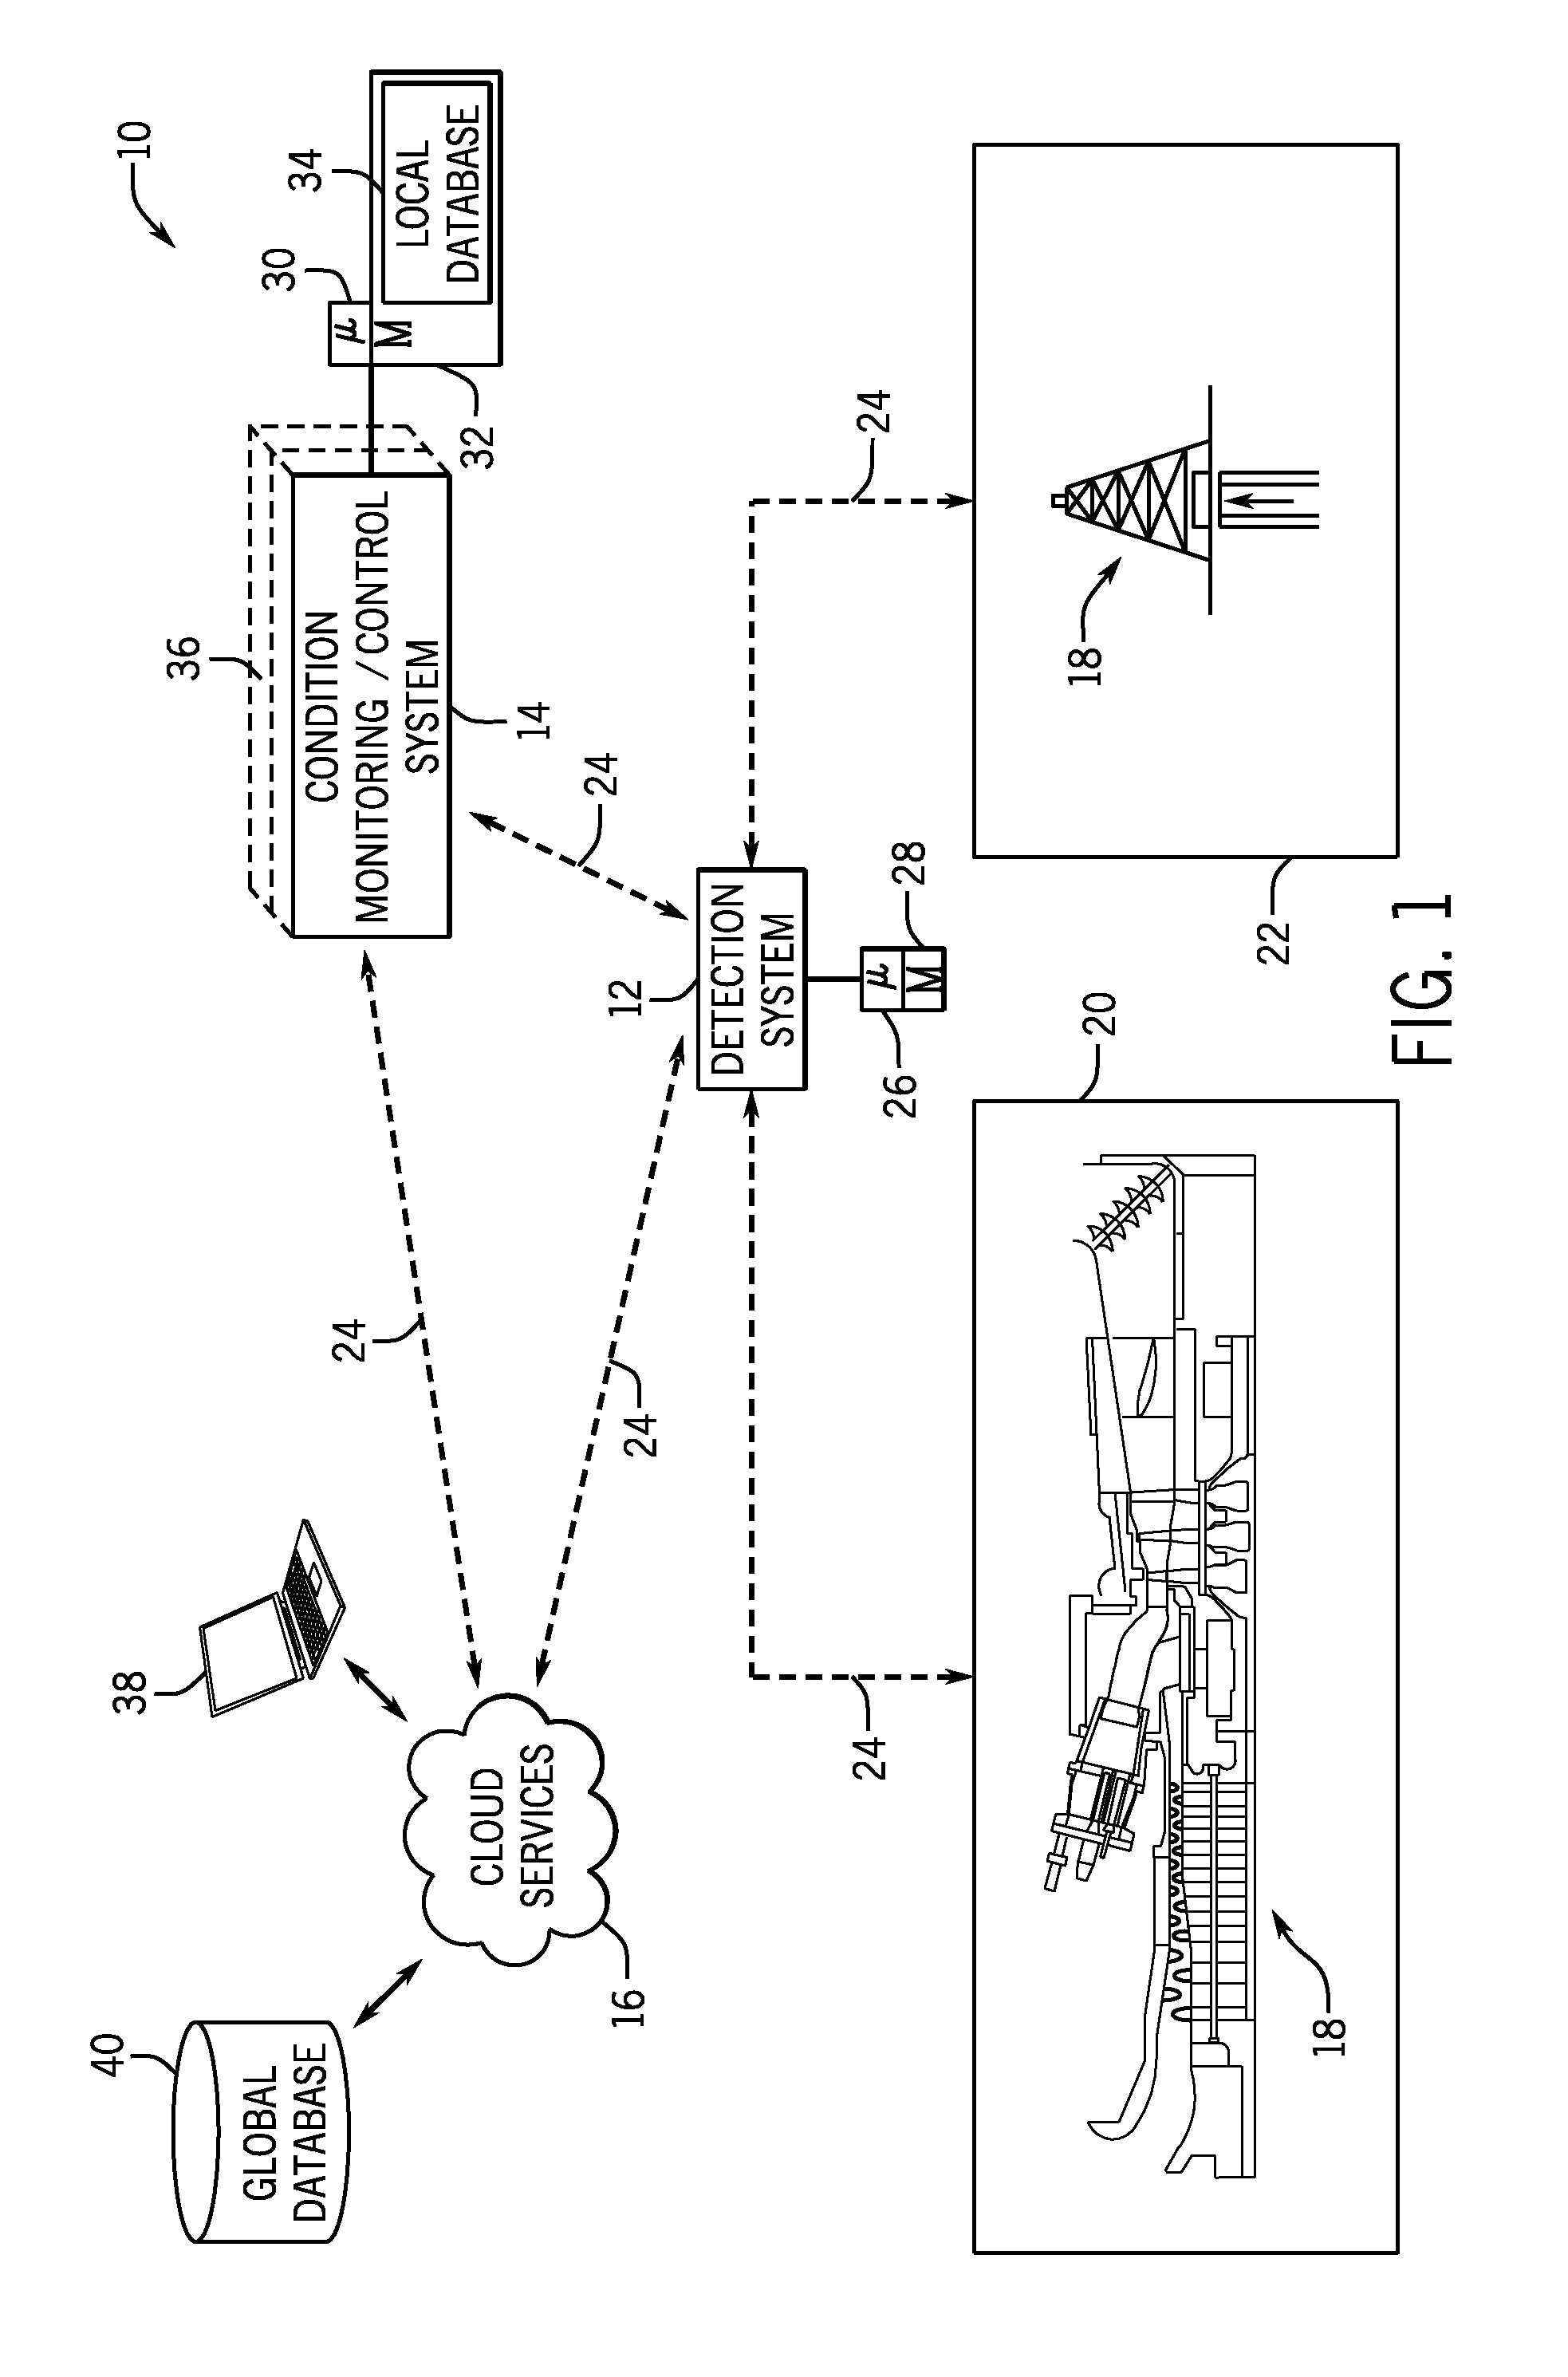 Vibration condition monitoring system and methods